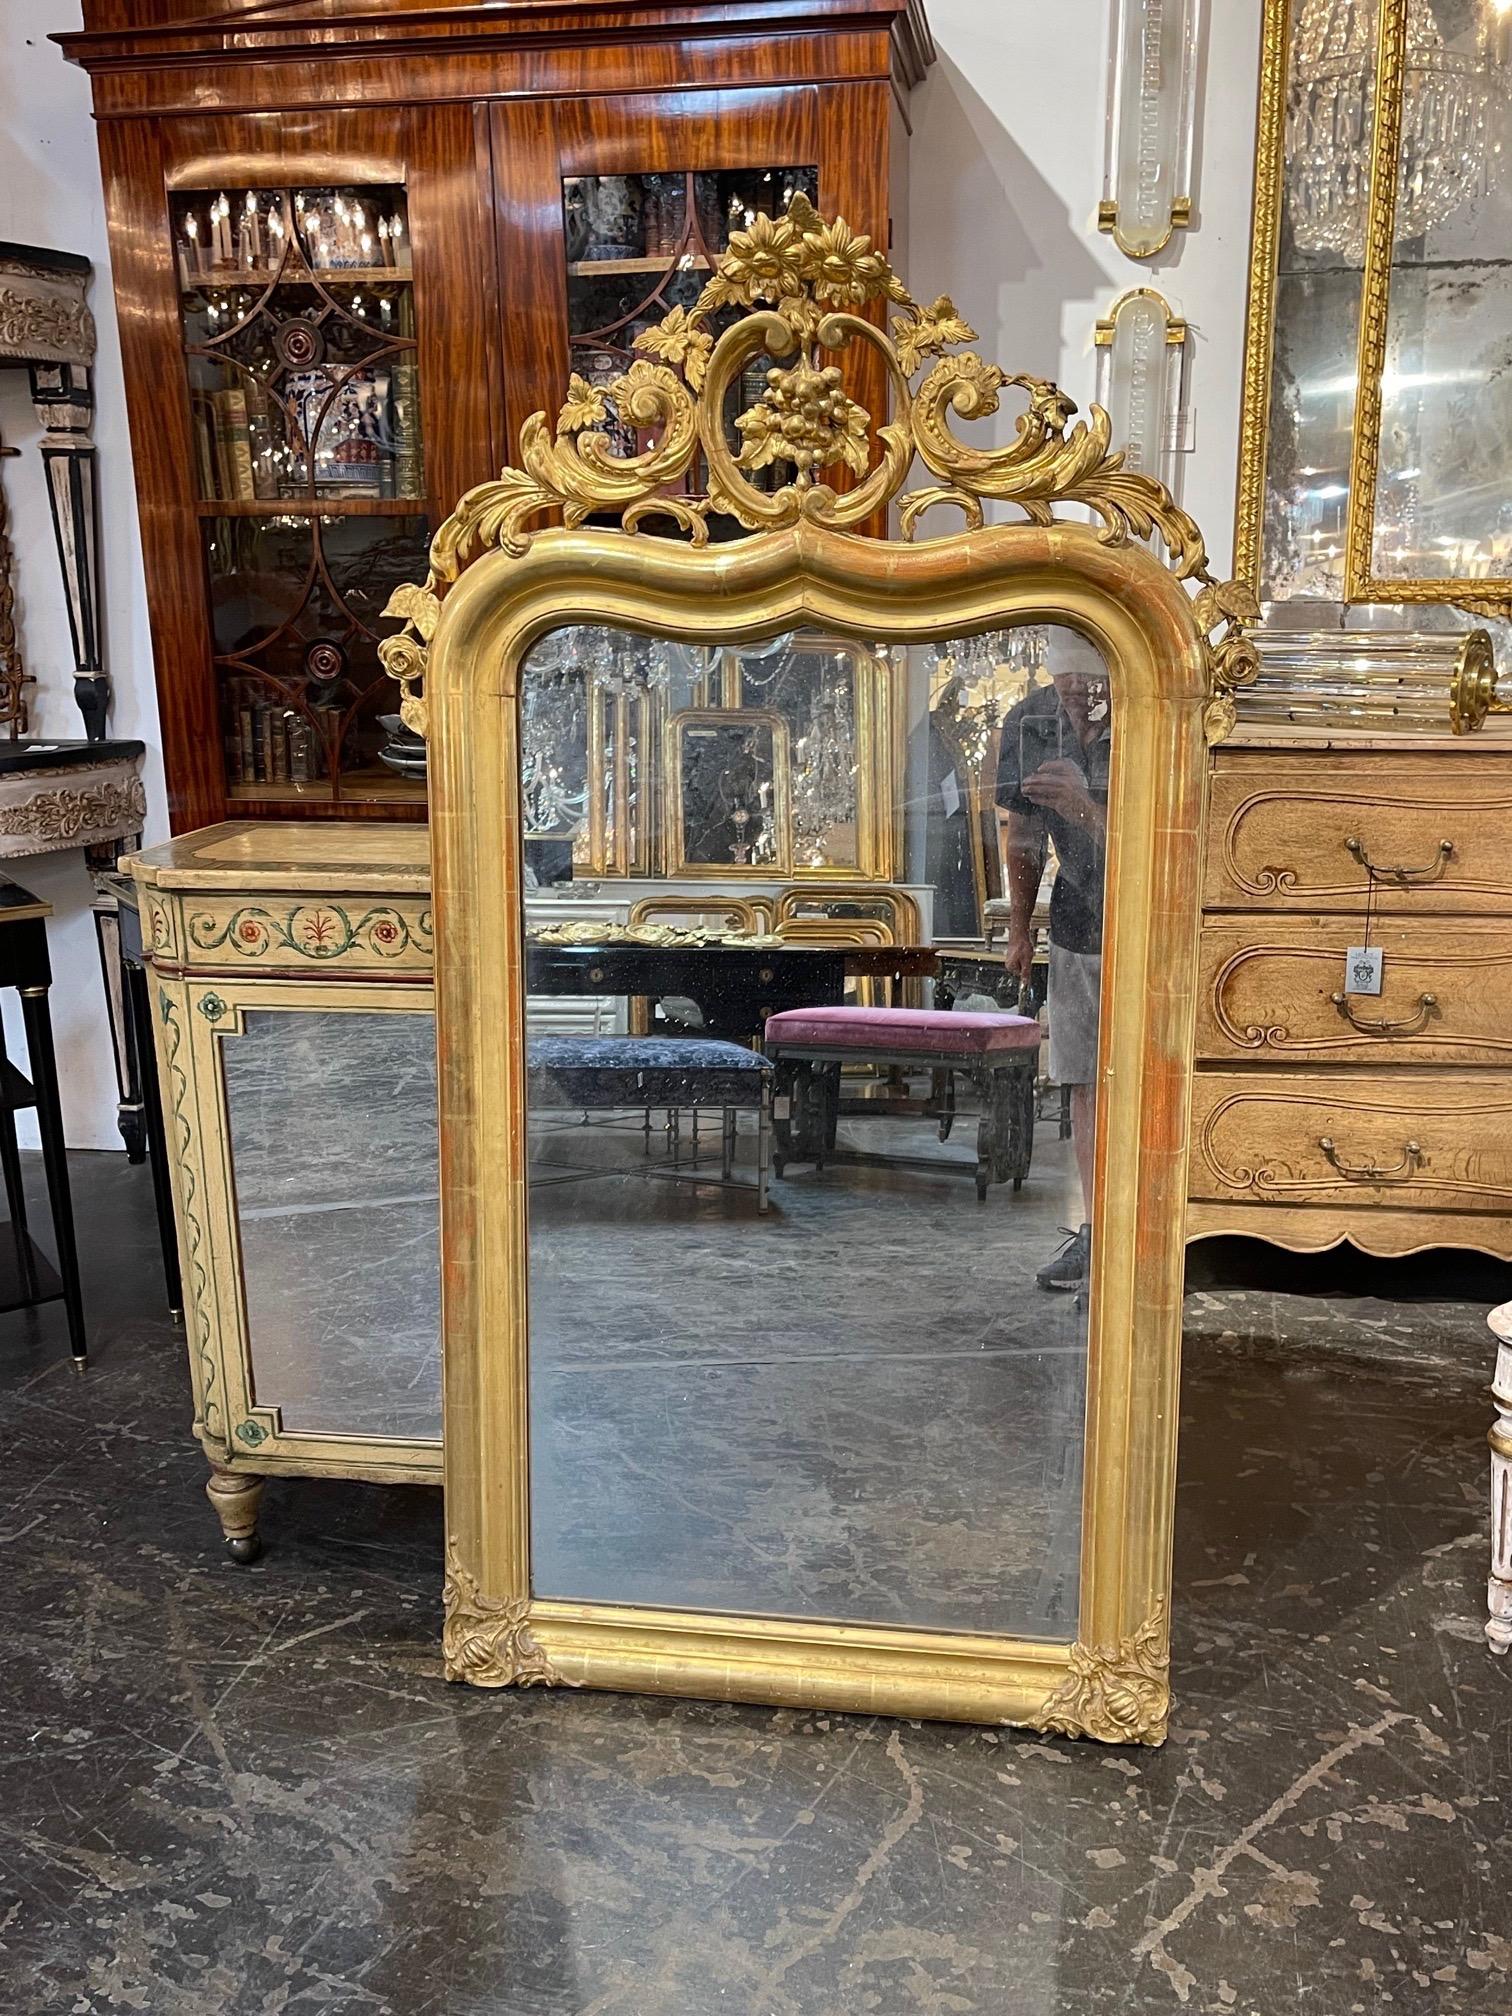 Decorative 19th century French carved and giltwood Louis XV style mirror. Amazing carvings including flowers, grapes and leaves. A very impressive piece!